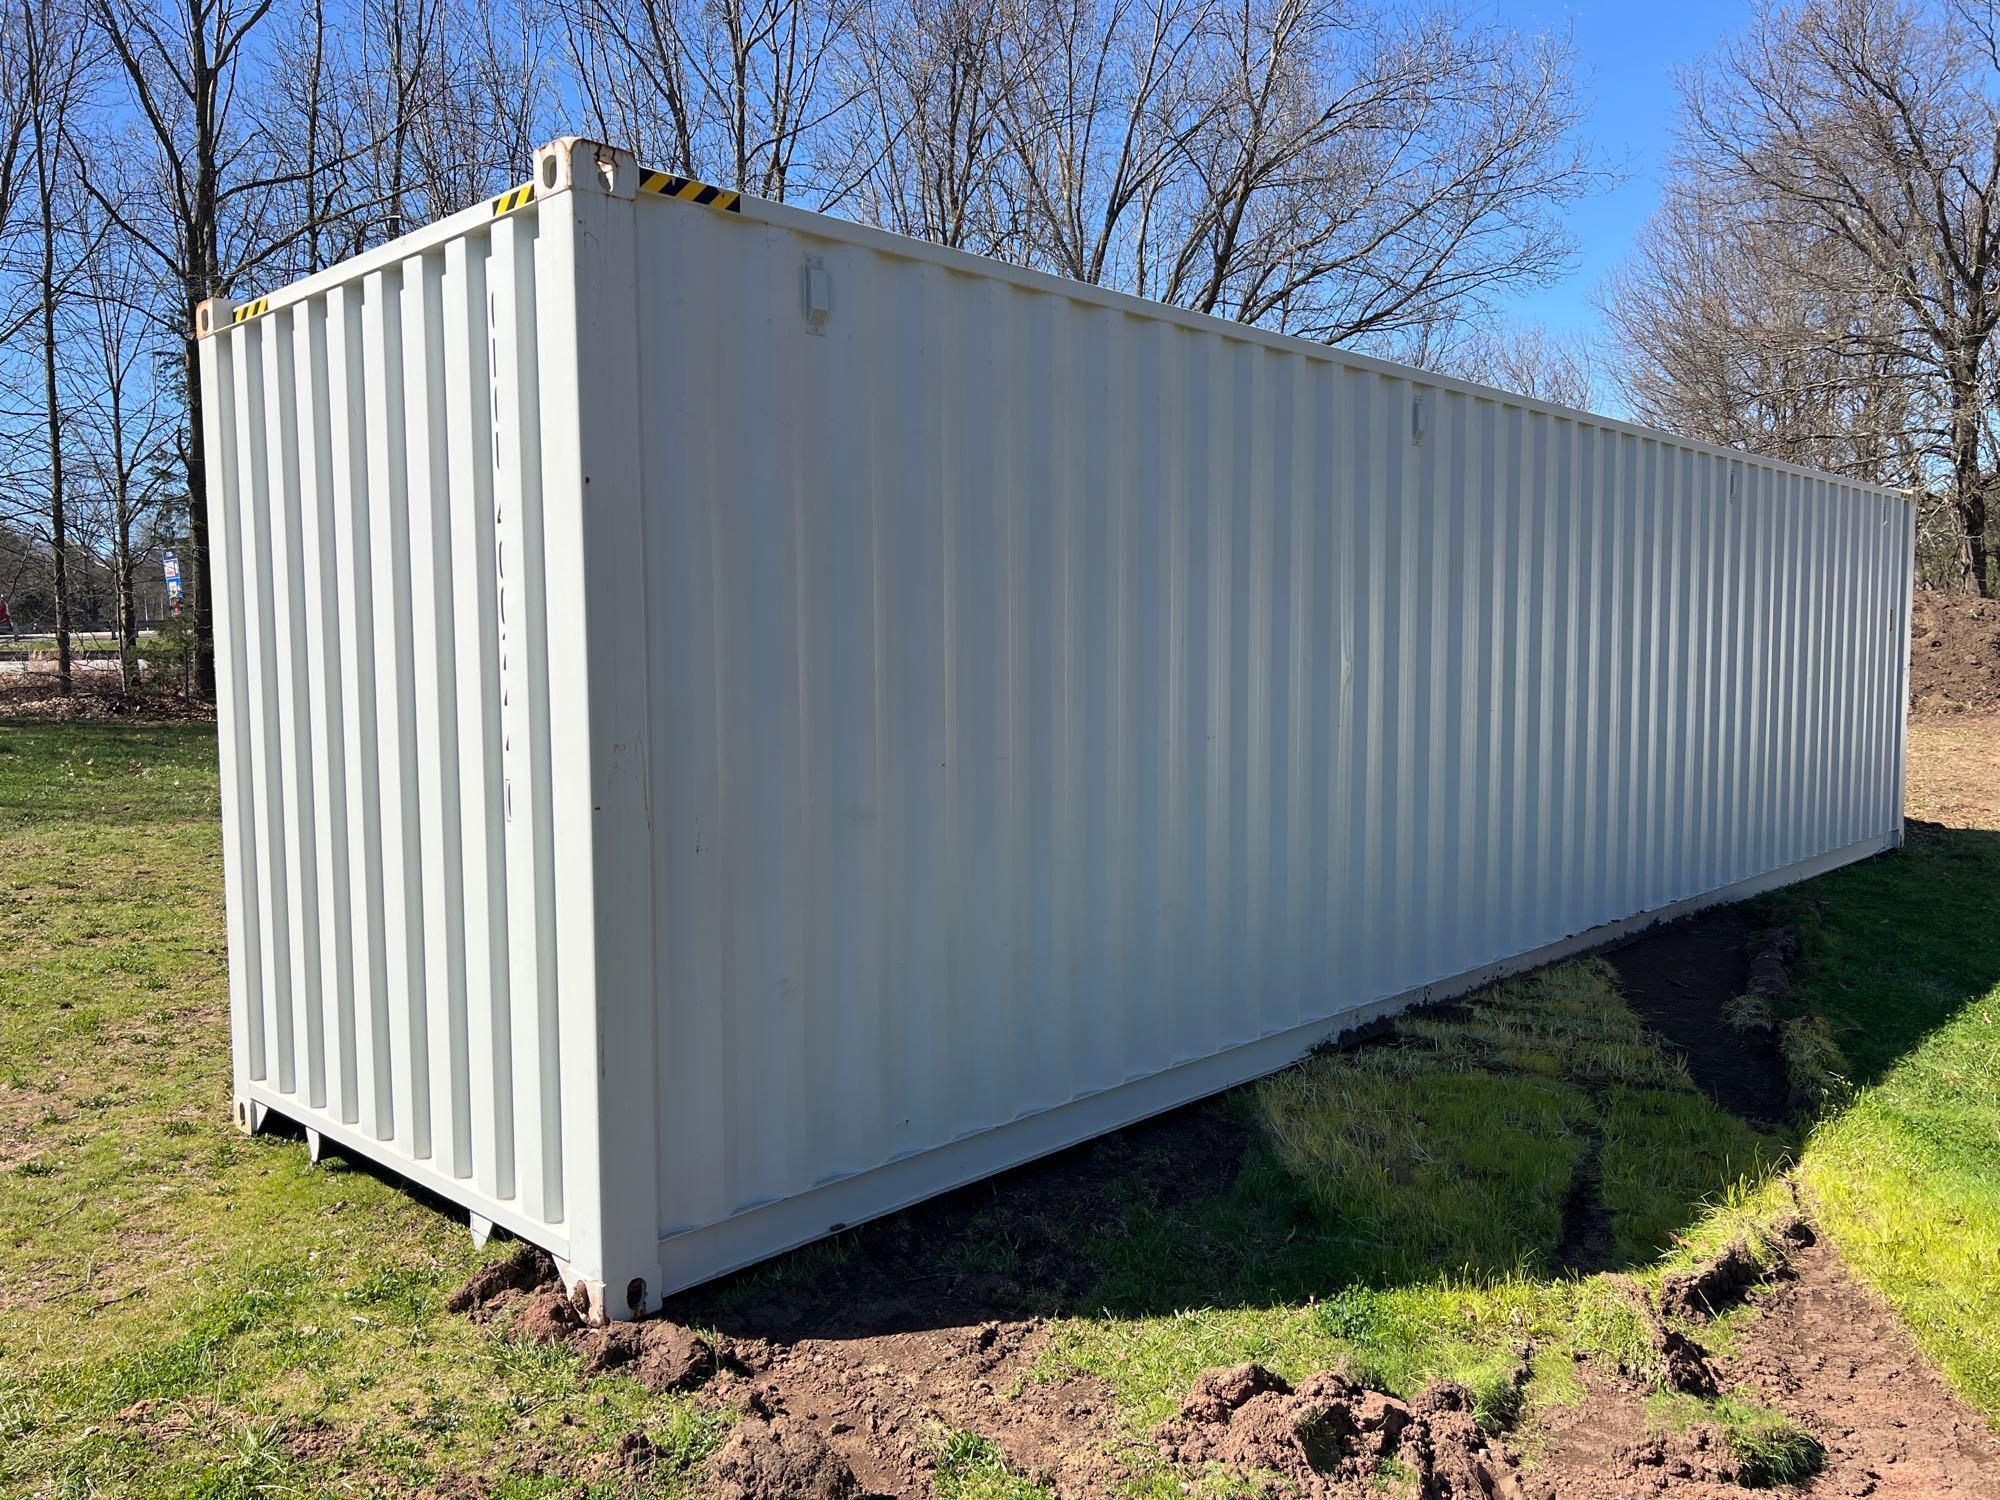 NEW 40FT. HIGH CUBE CONTAINER MULTI-USE CONTAINER U-CFGU...4002440 45G3 Details: Four Side Open Door